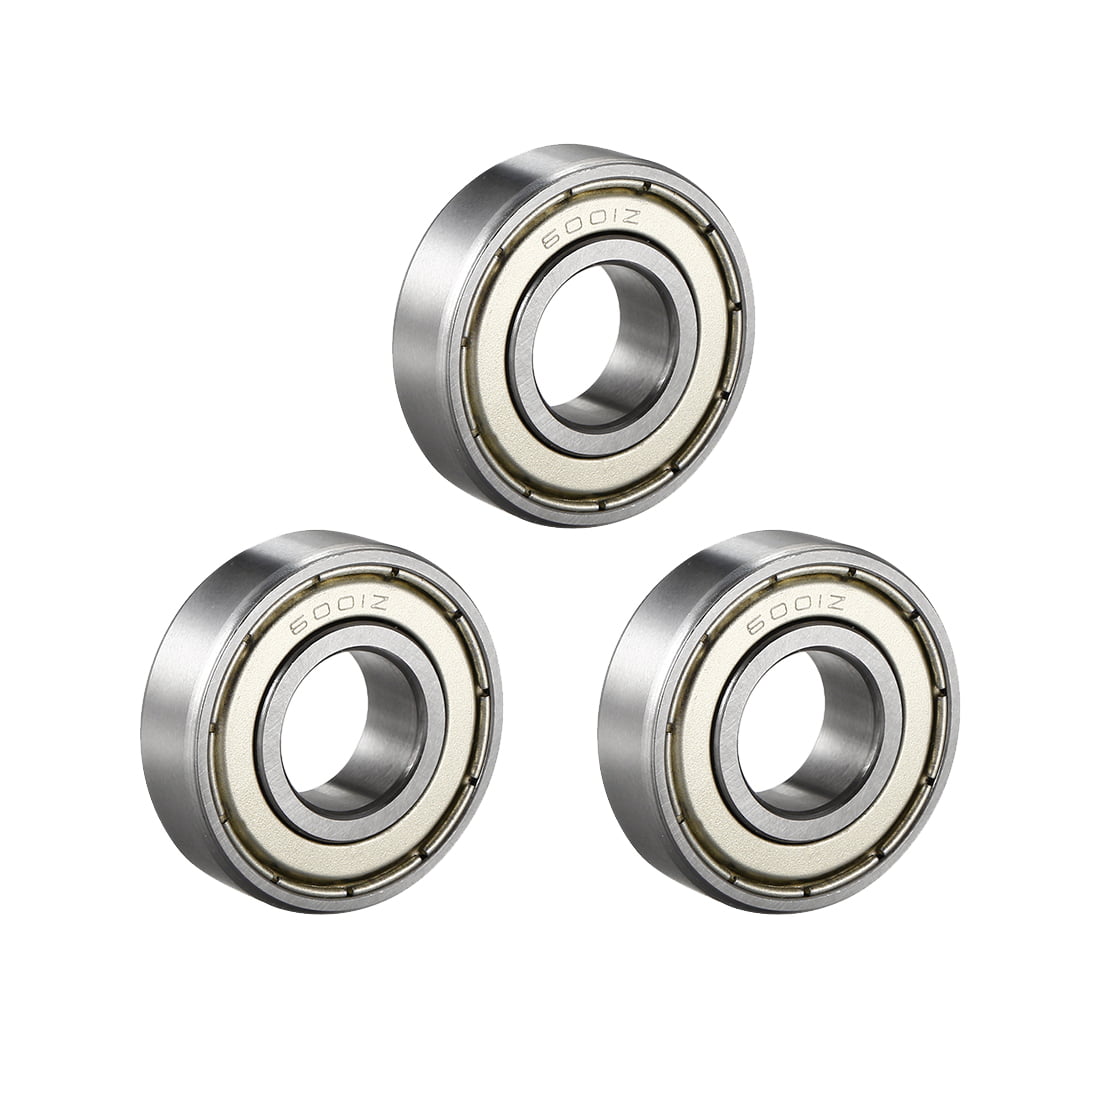 12x18x4mm Precision Ball Bearings 440C Stainless Steel Rubber Seals 2pcs 